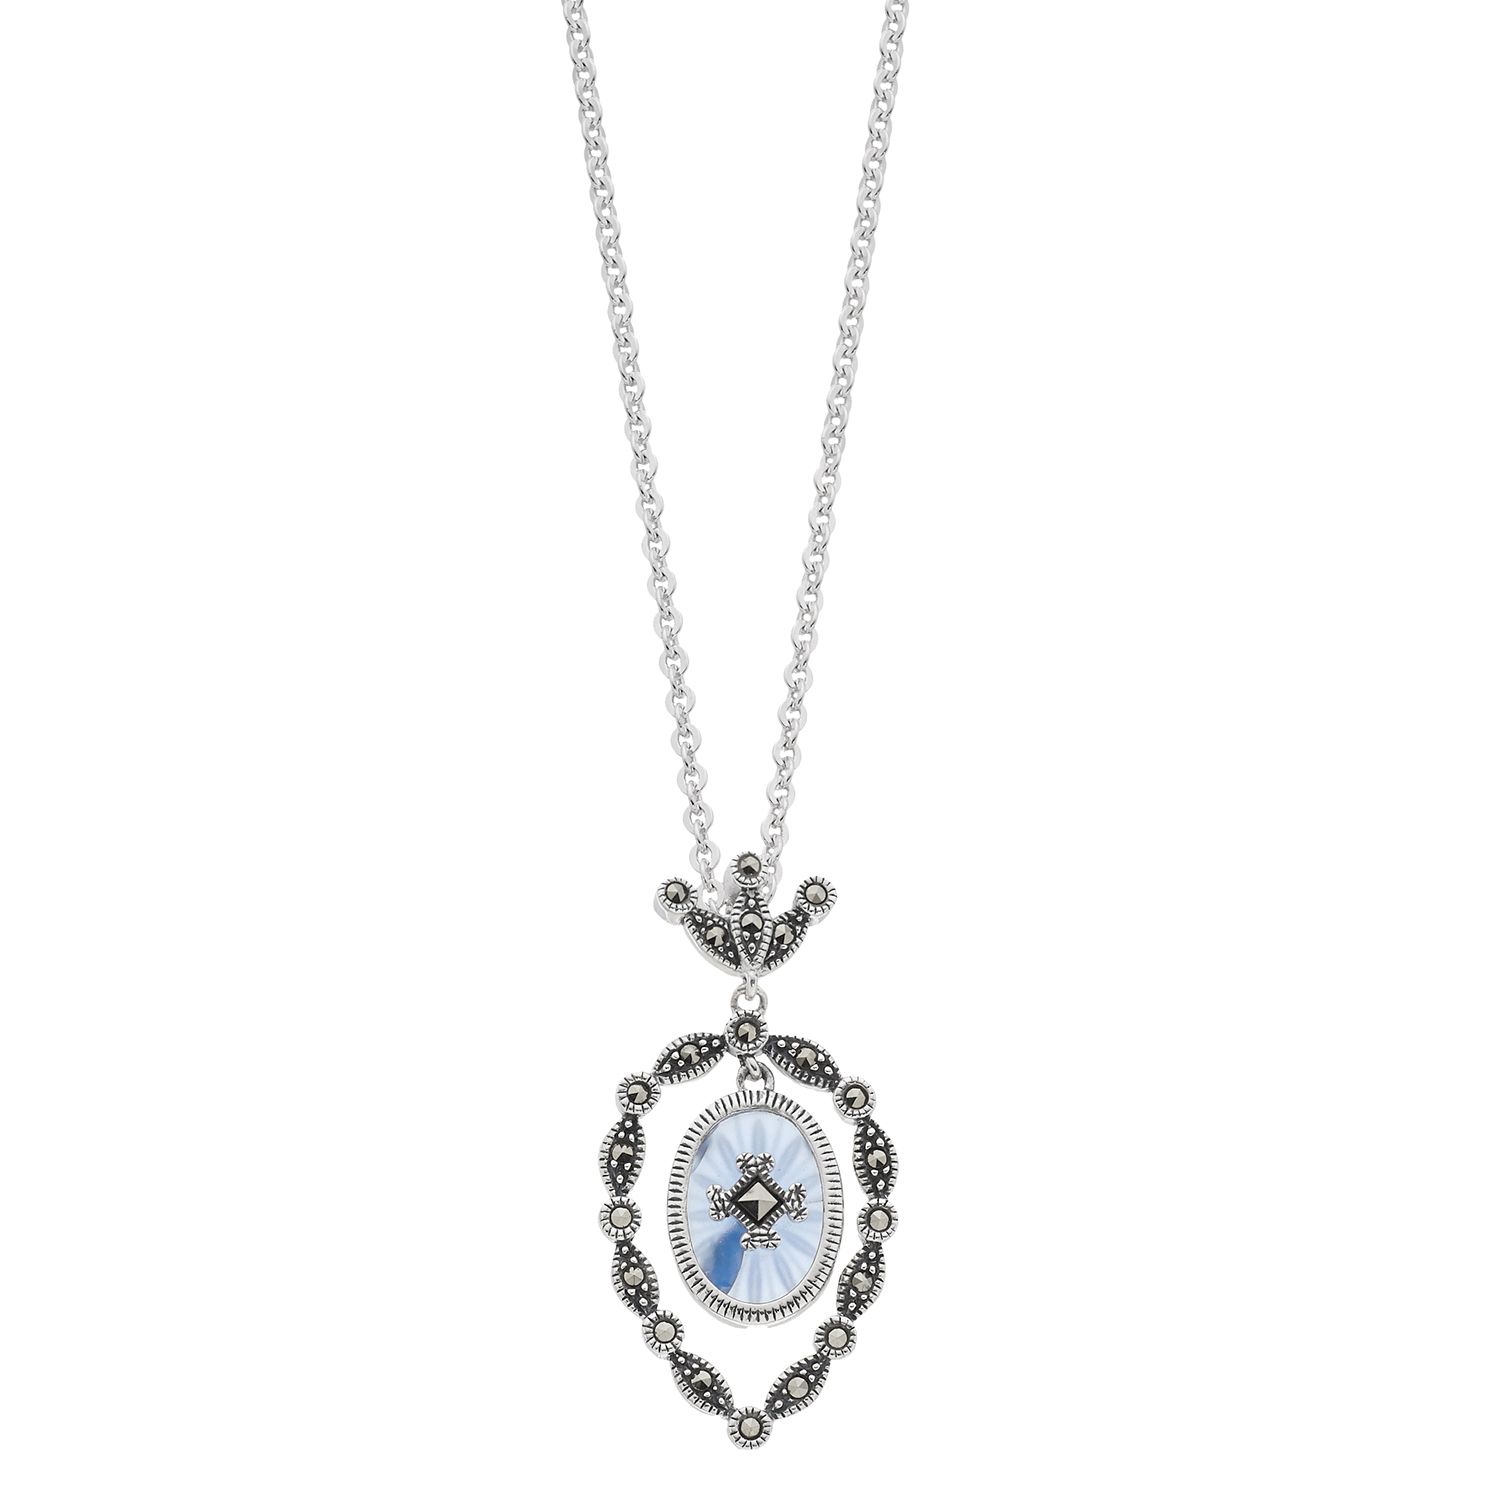 Image for Lavish by TJM Sterling Silver Blue Sunray Crystal & Marcasite Pendant Necklace at Kohl's.